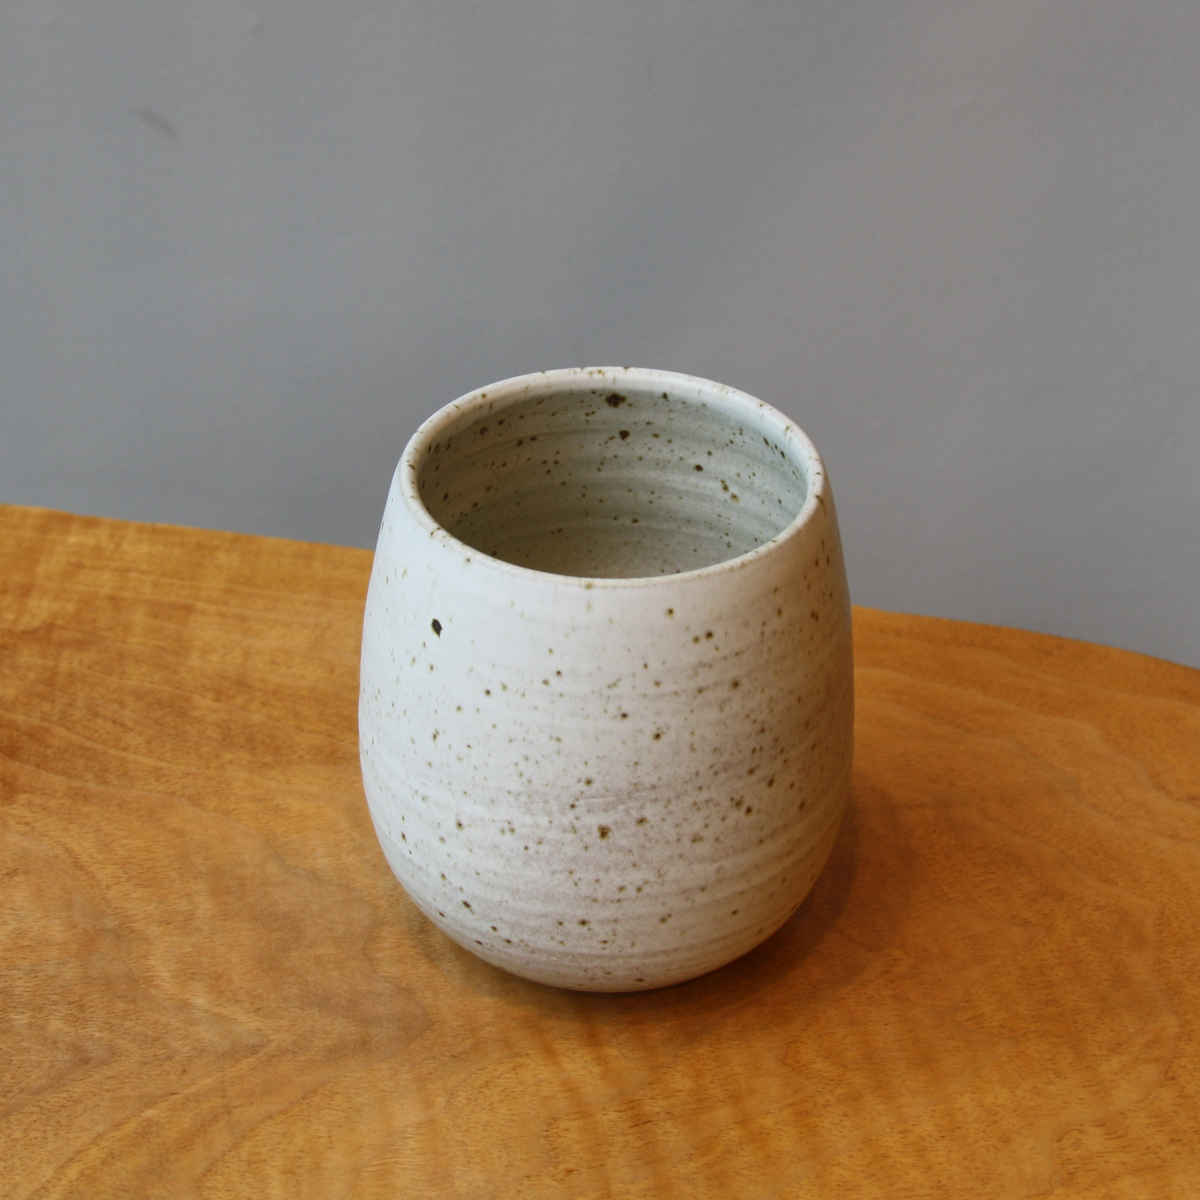 Small speckled ivory bulb shaped vase